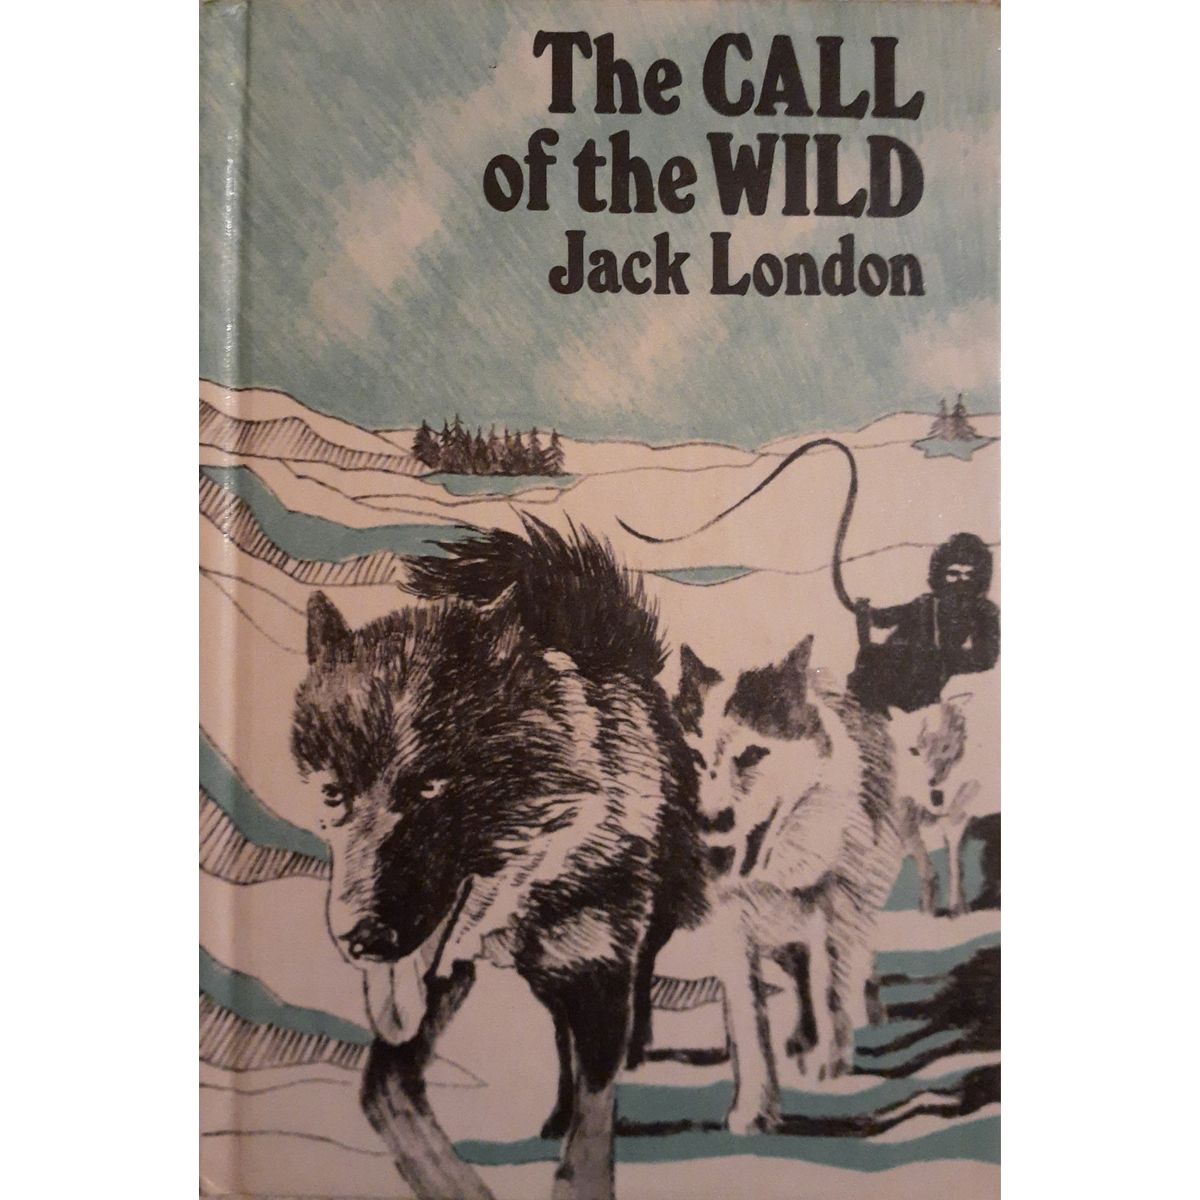 ISBN: 9780435120023 / 0435120026 - The Call of the Wild by Jack London [1983]